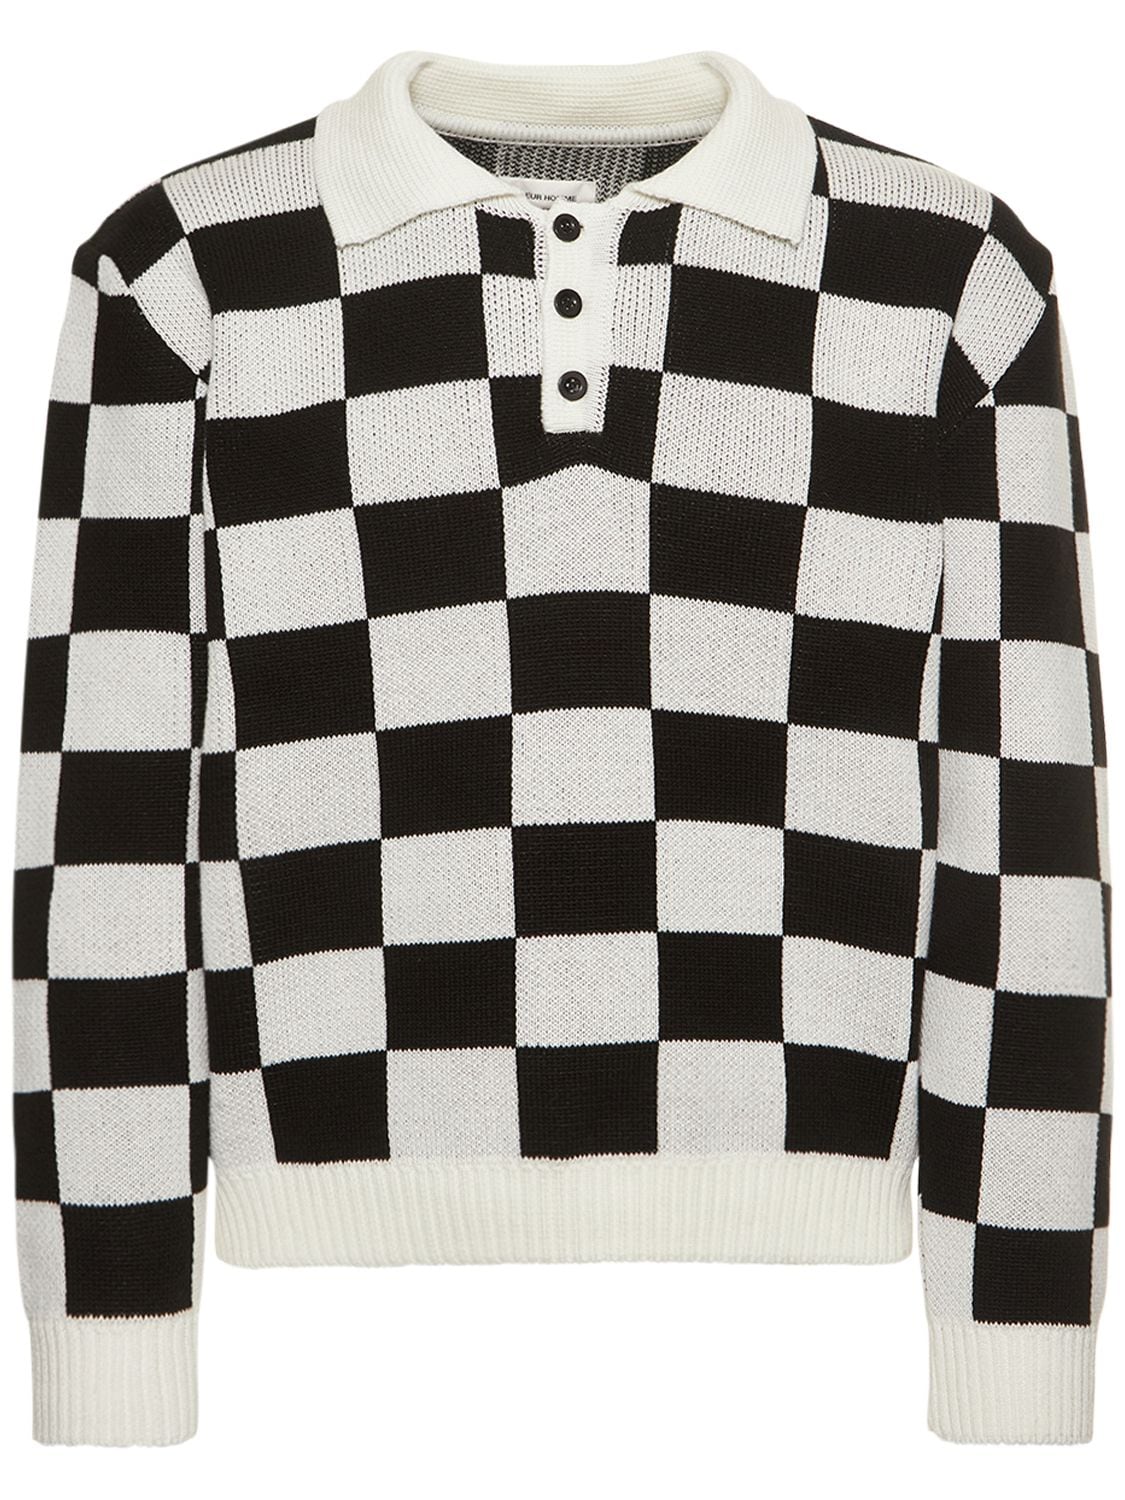 Flaneur Homme Cotton Blend Knit Long Sleeve Polo In Black,white